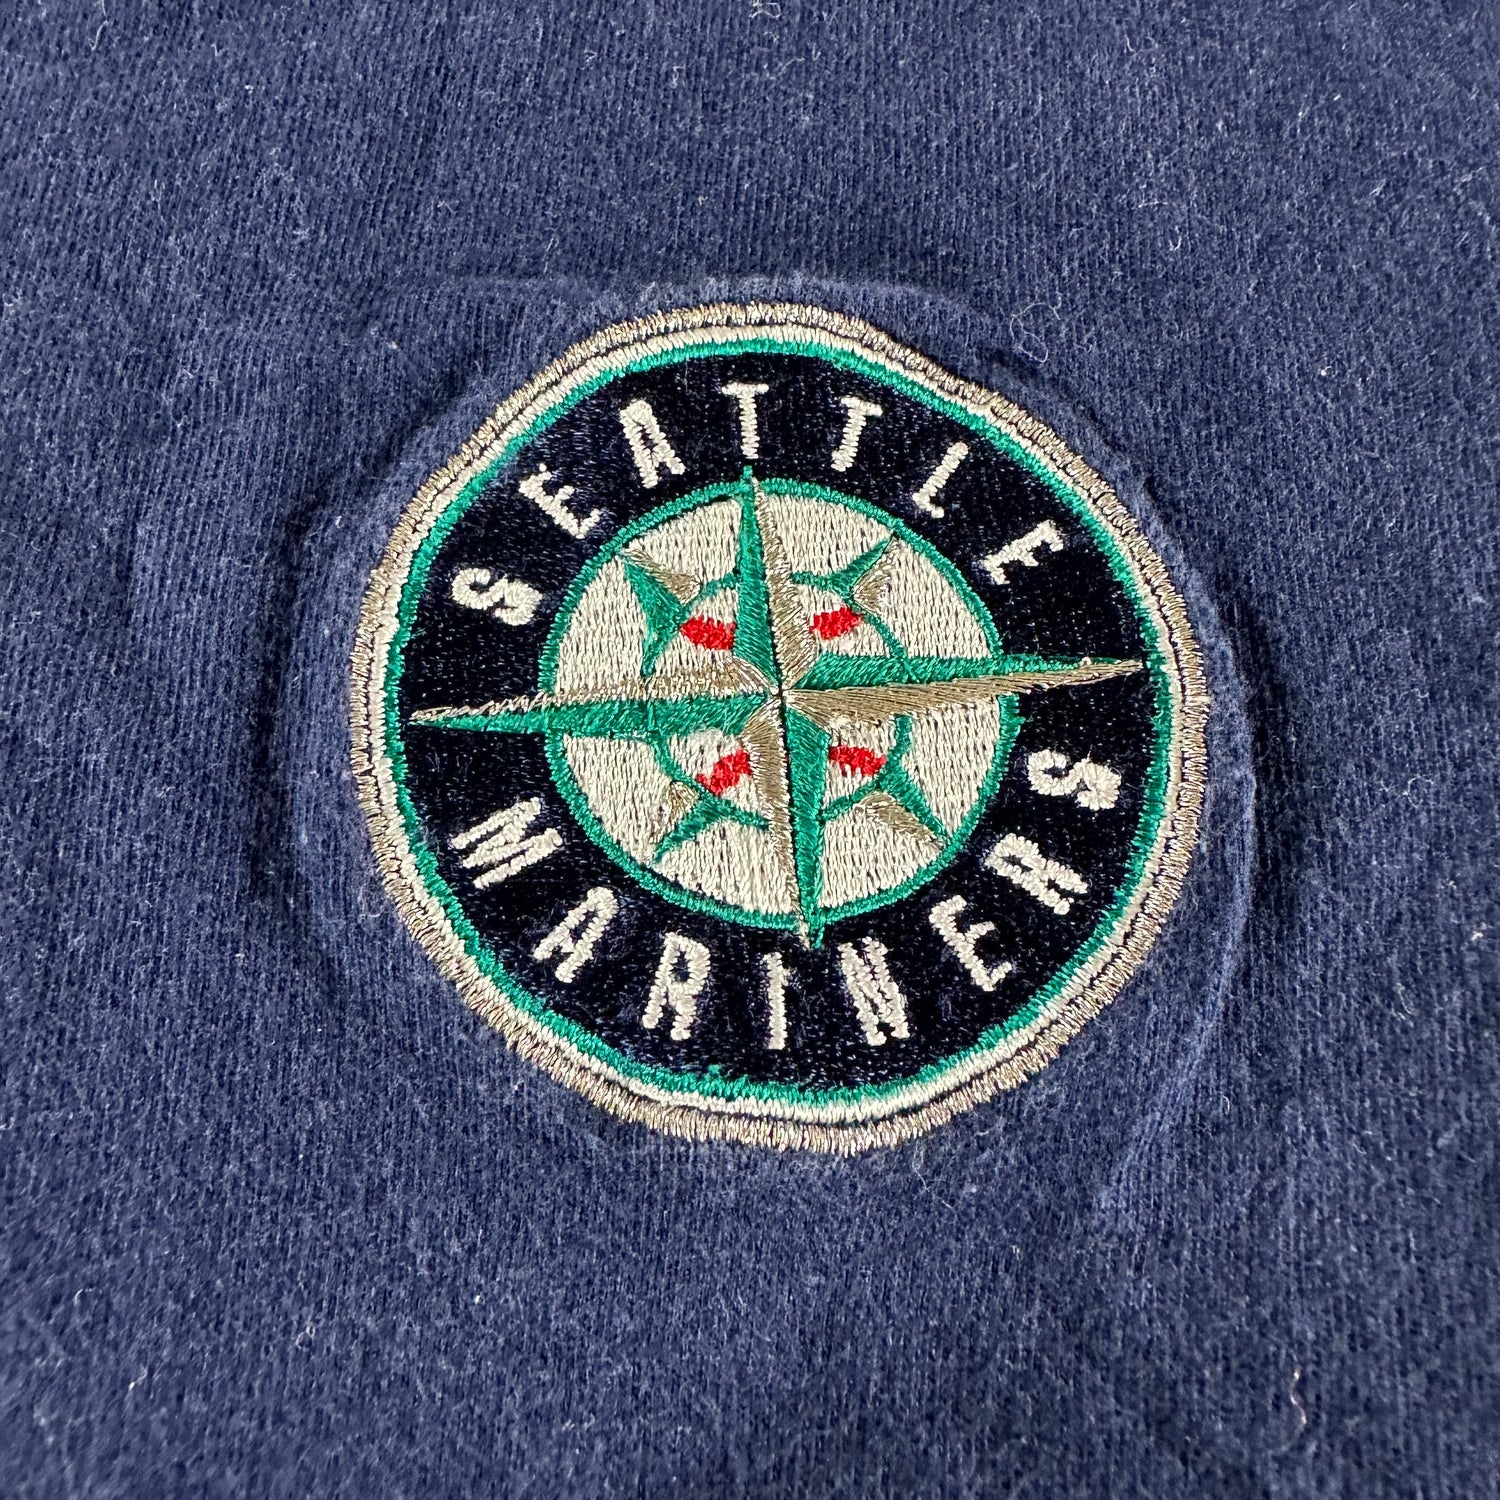 Vintage 1990s Seattle Mariners T-shirt size Large